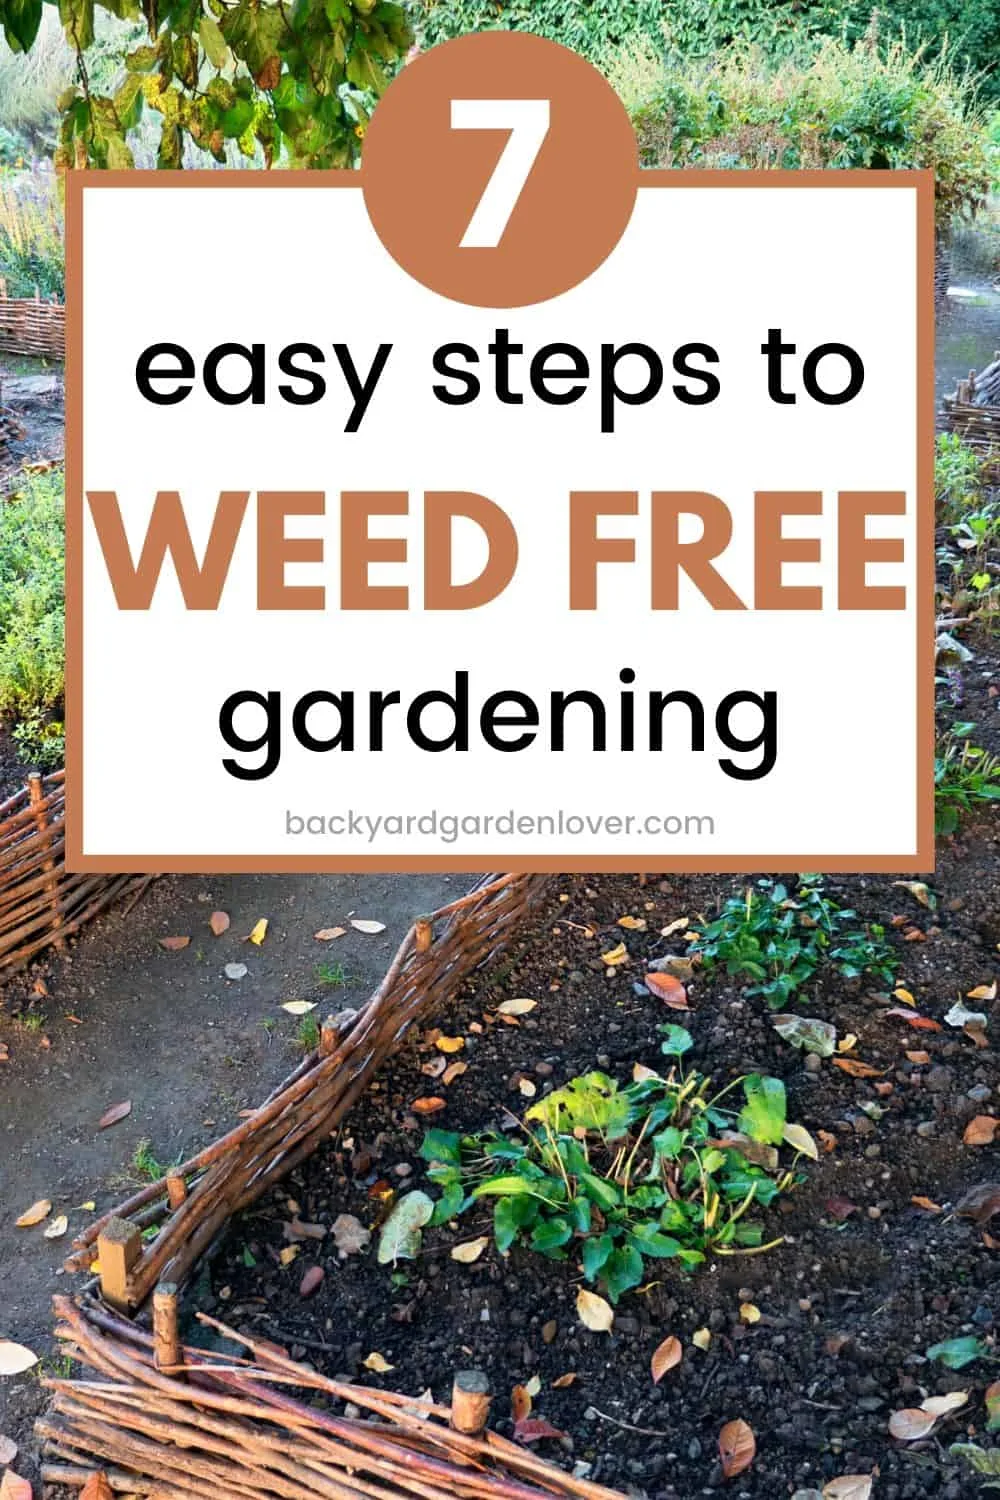 7 easy steps to weed-free gardening - Pinterest image